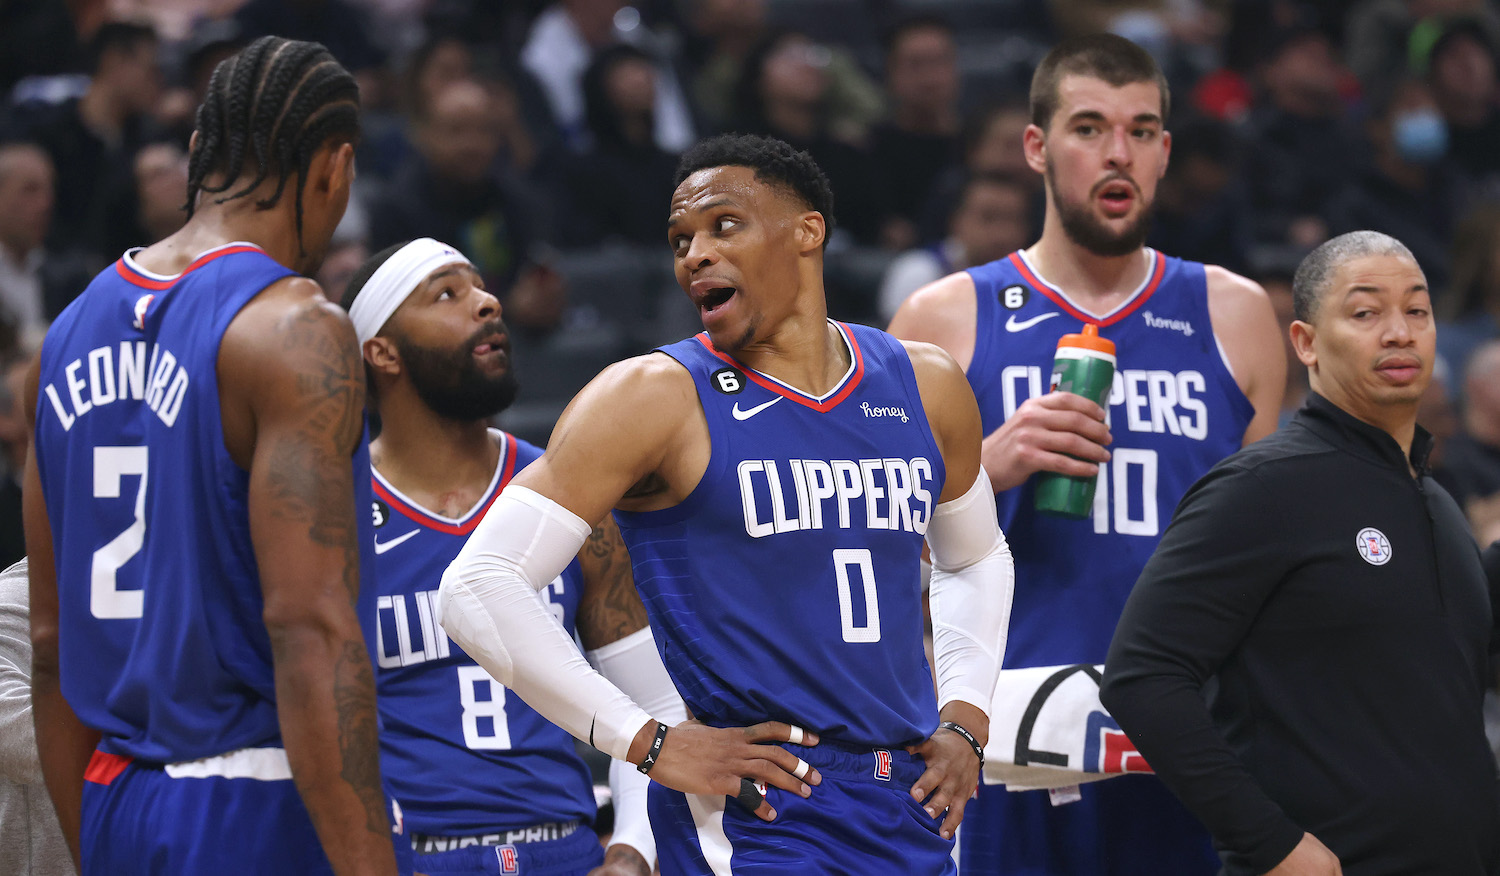 Russell Westbrook #0 of the LA Clippers speaks in front of Kawhi Leonard #2, Marcus Morris Sr. #8, Ivica Zubac #40 and Tyronn Lue of the LA Clippers during a 108-101 Minnesota Timberwolves win at Crypto.com Arena on February 28, 2023 in Los Angeles, California. NOTE TO USER: User expressly acknowledges and agrees that, by downloading and or using this photograph, user is consenting to the terms and conditions of the Getty Images License Agreement. (Photo by Harry How/Getty Images)